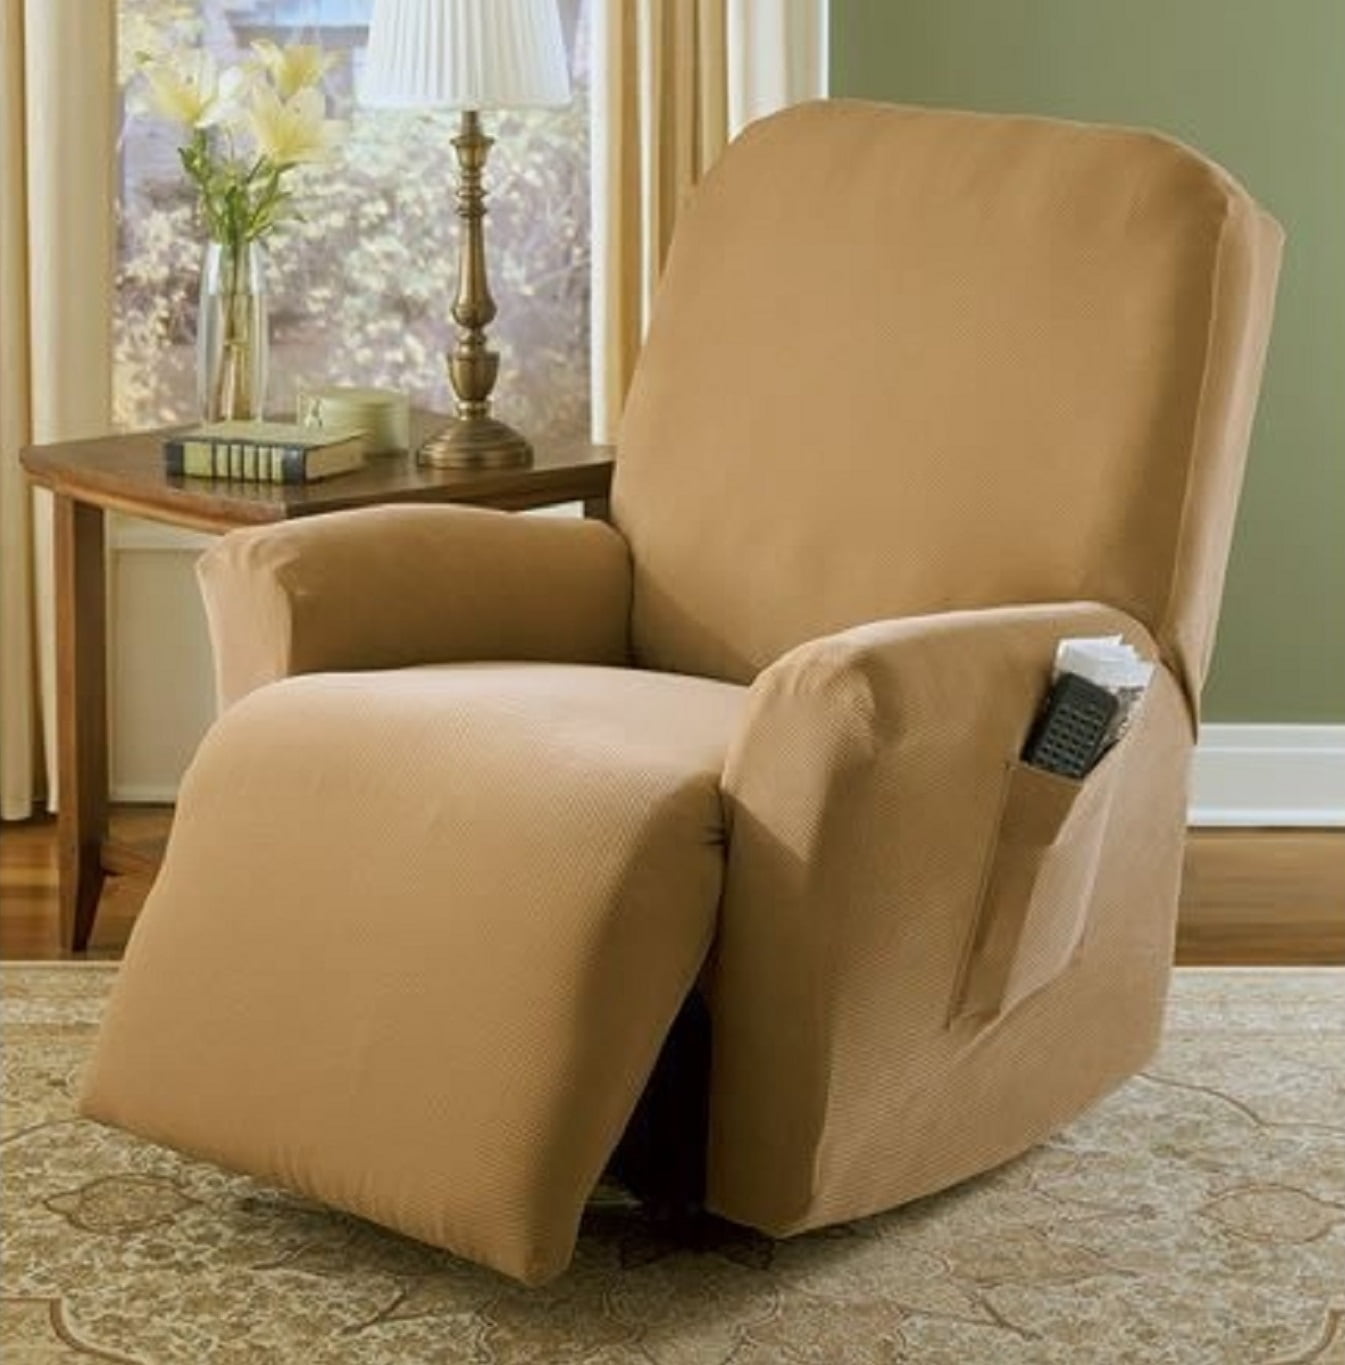 Orly'sDream One piece Stretch Recliner Chair Furniture Slipcovers with